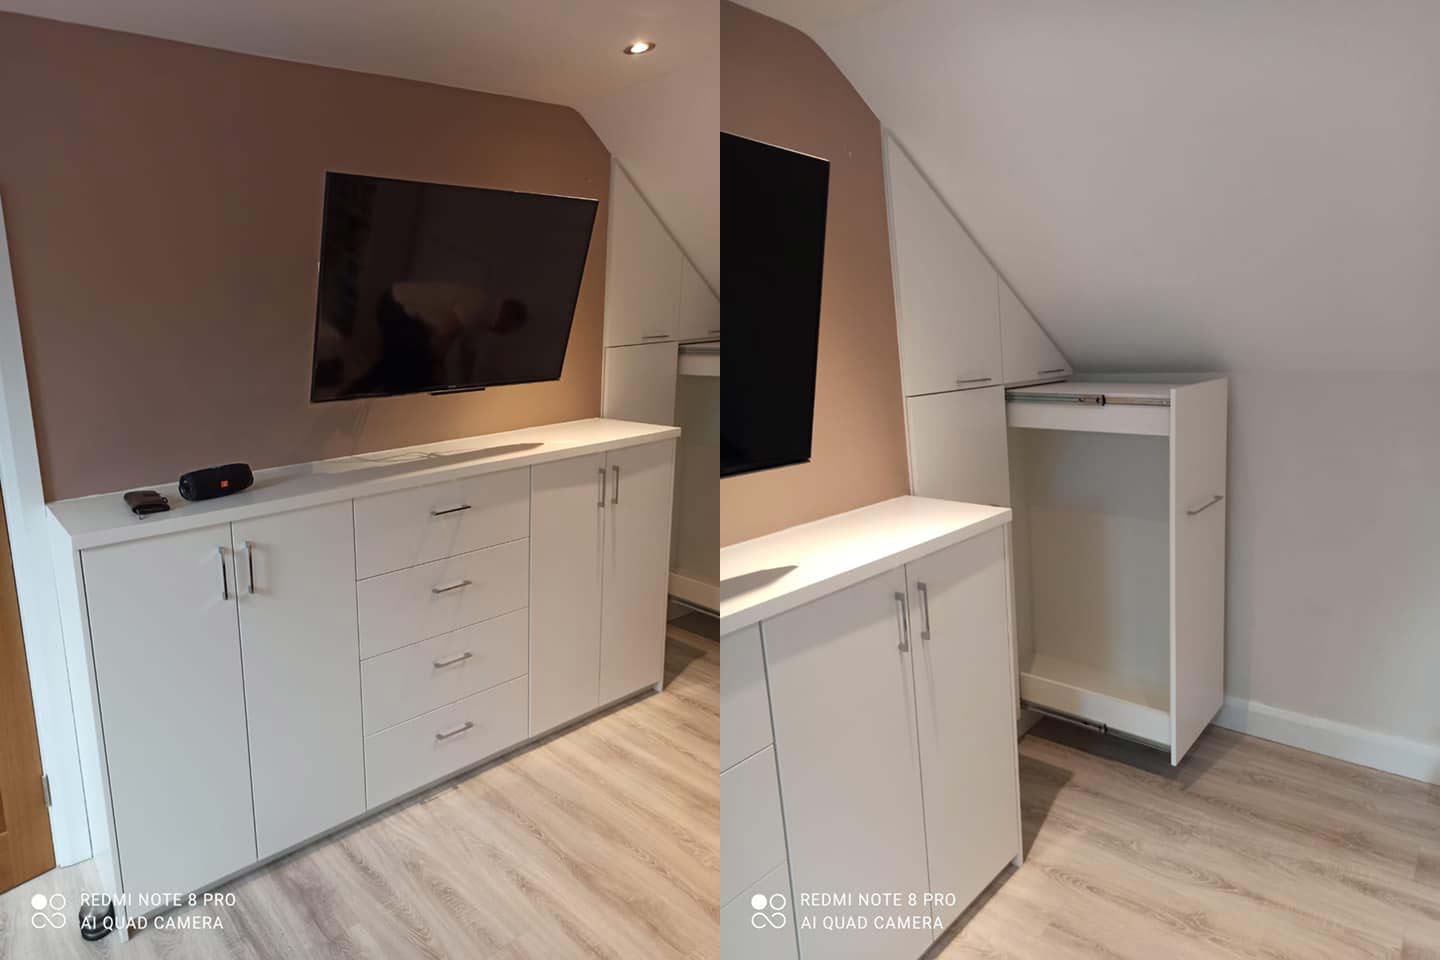 Under TV unit and a corner pull out cabinet